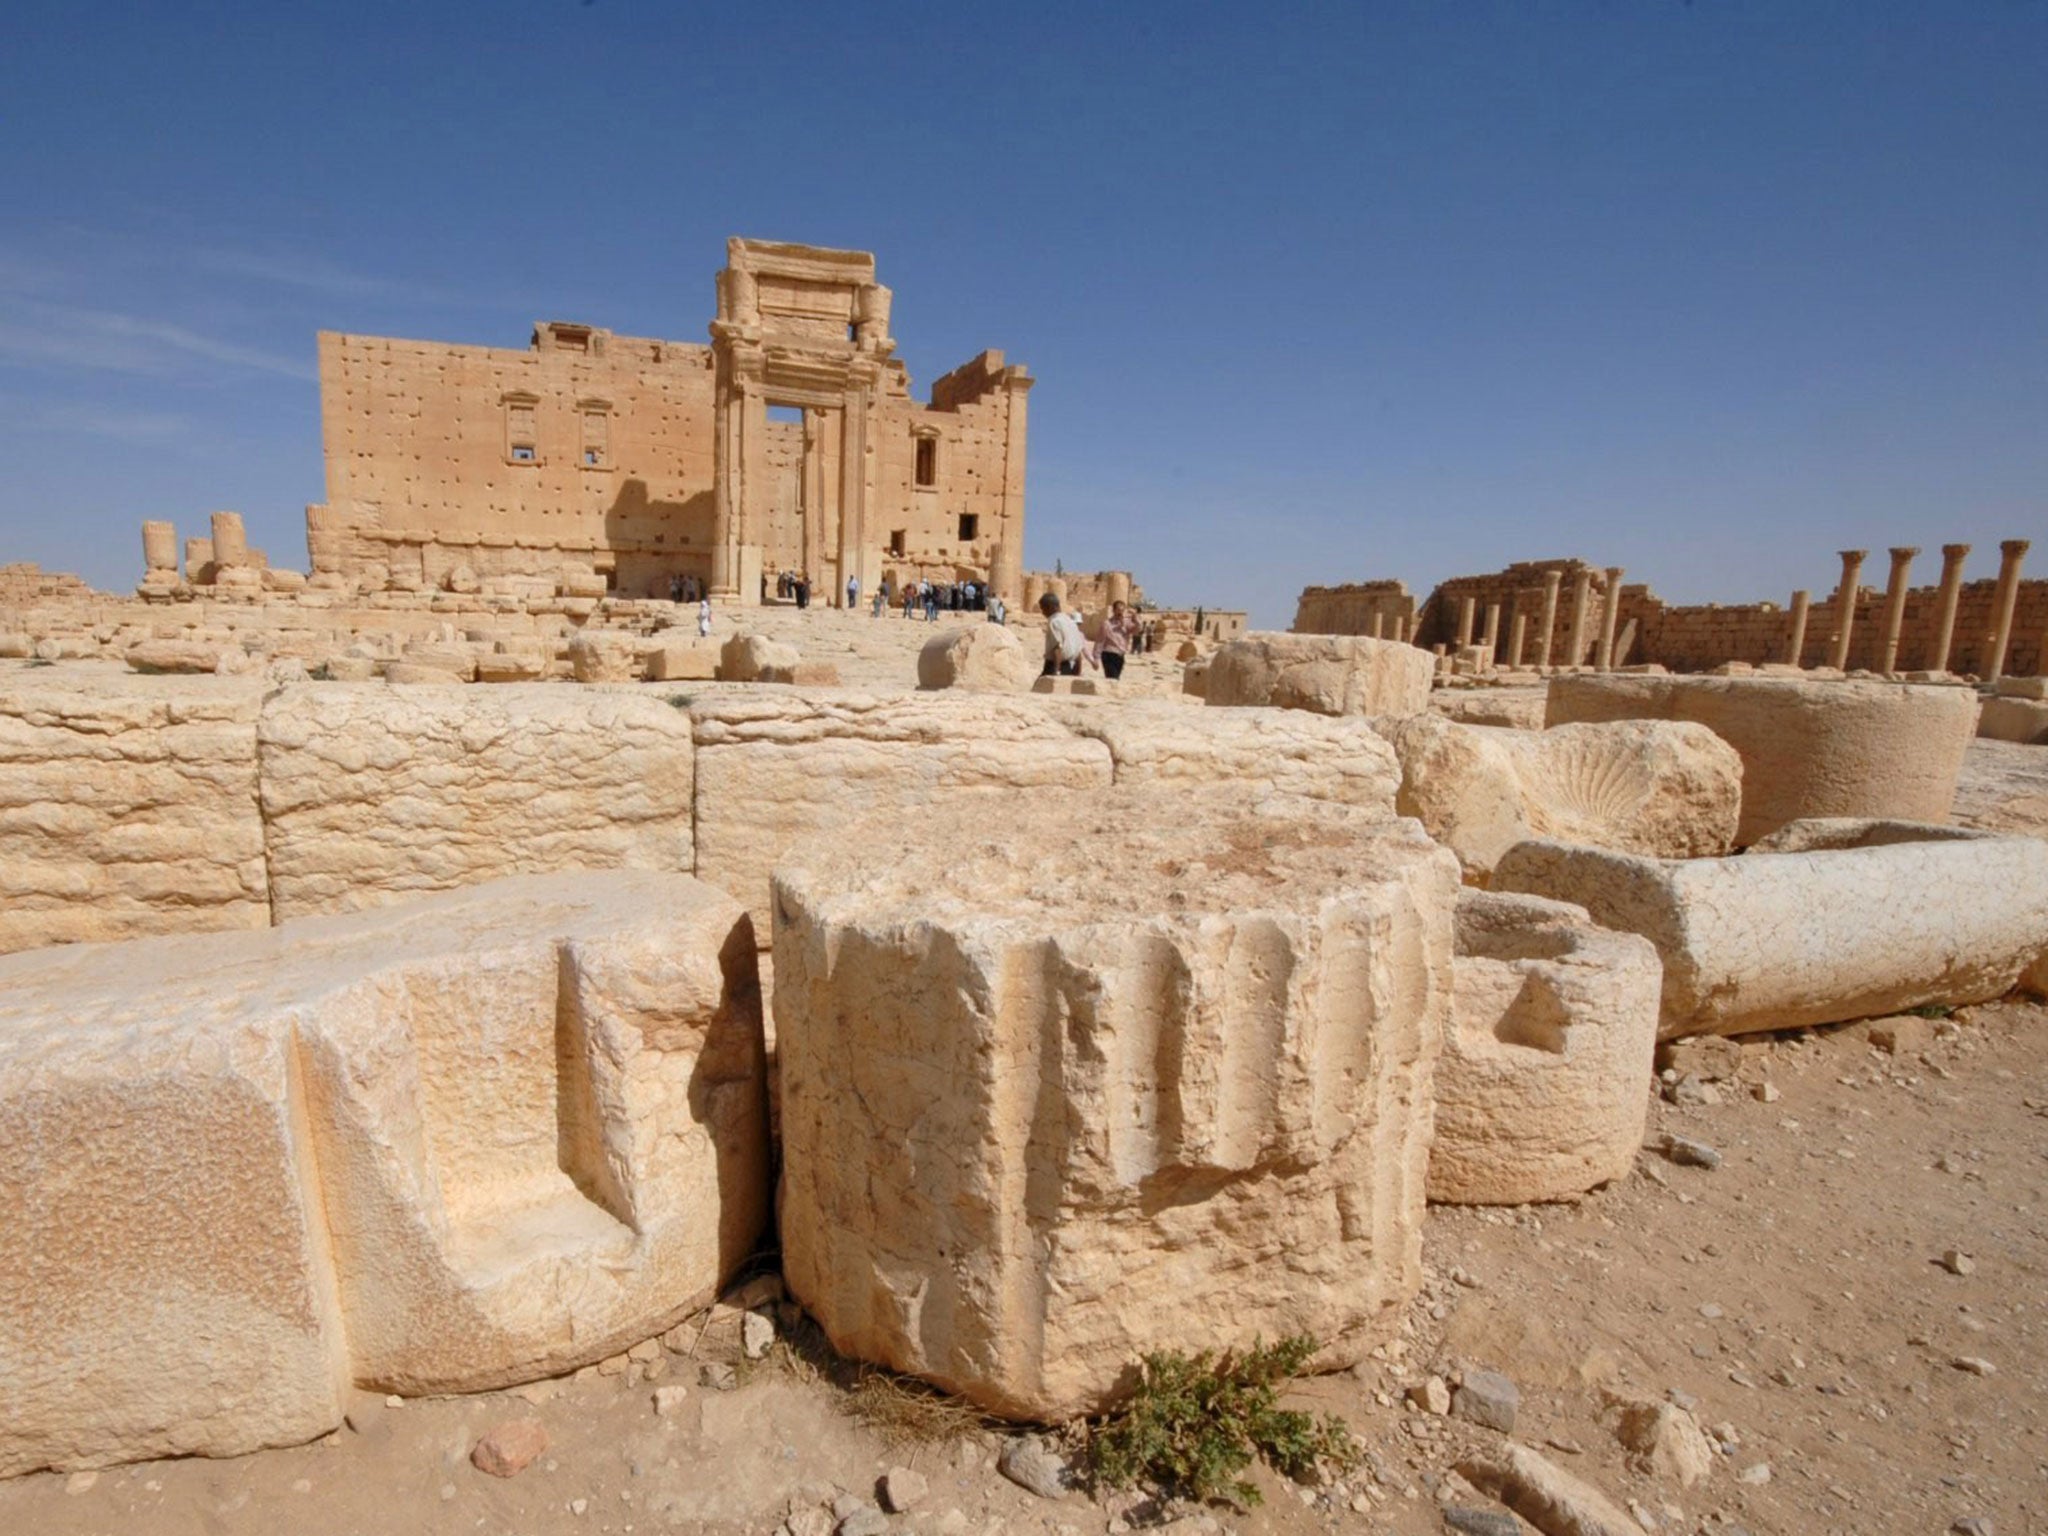 A general view shows the Temple of Bel in the historical city of Palmyra, Syria